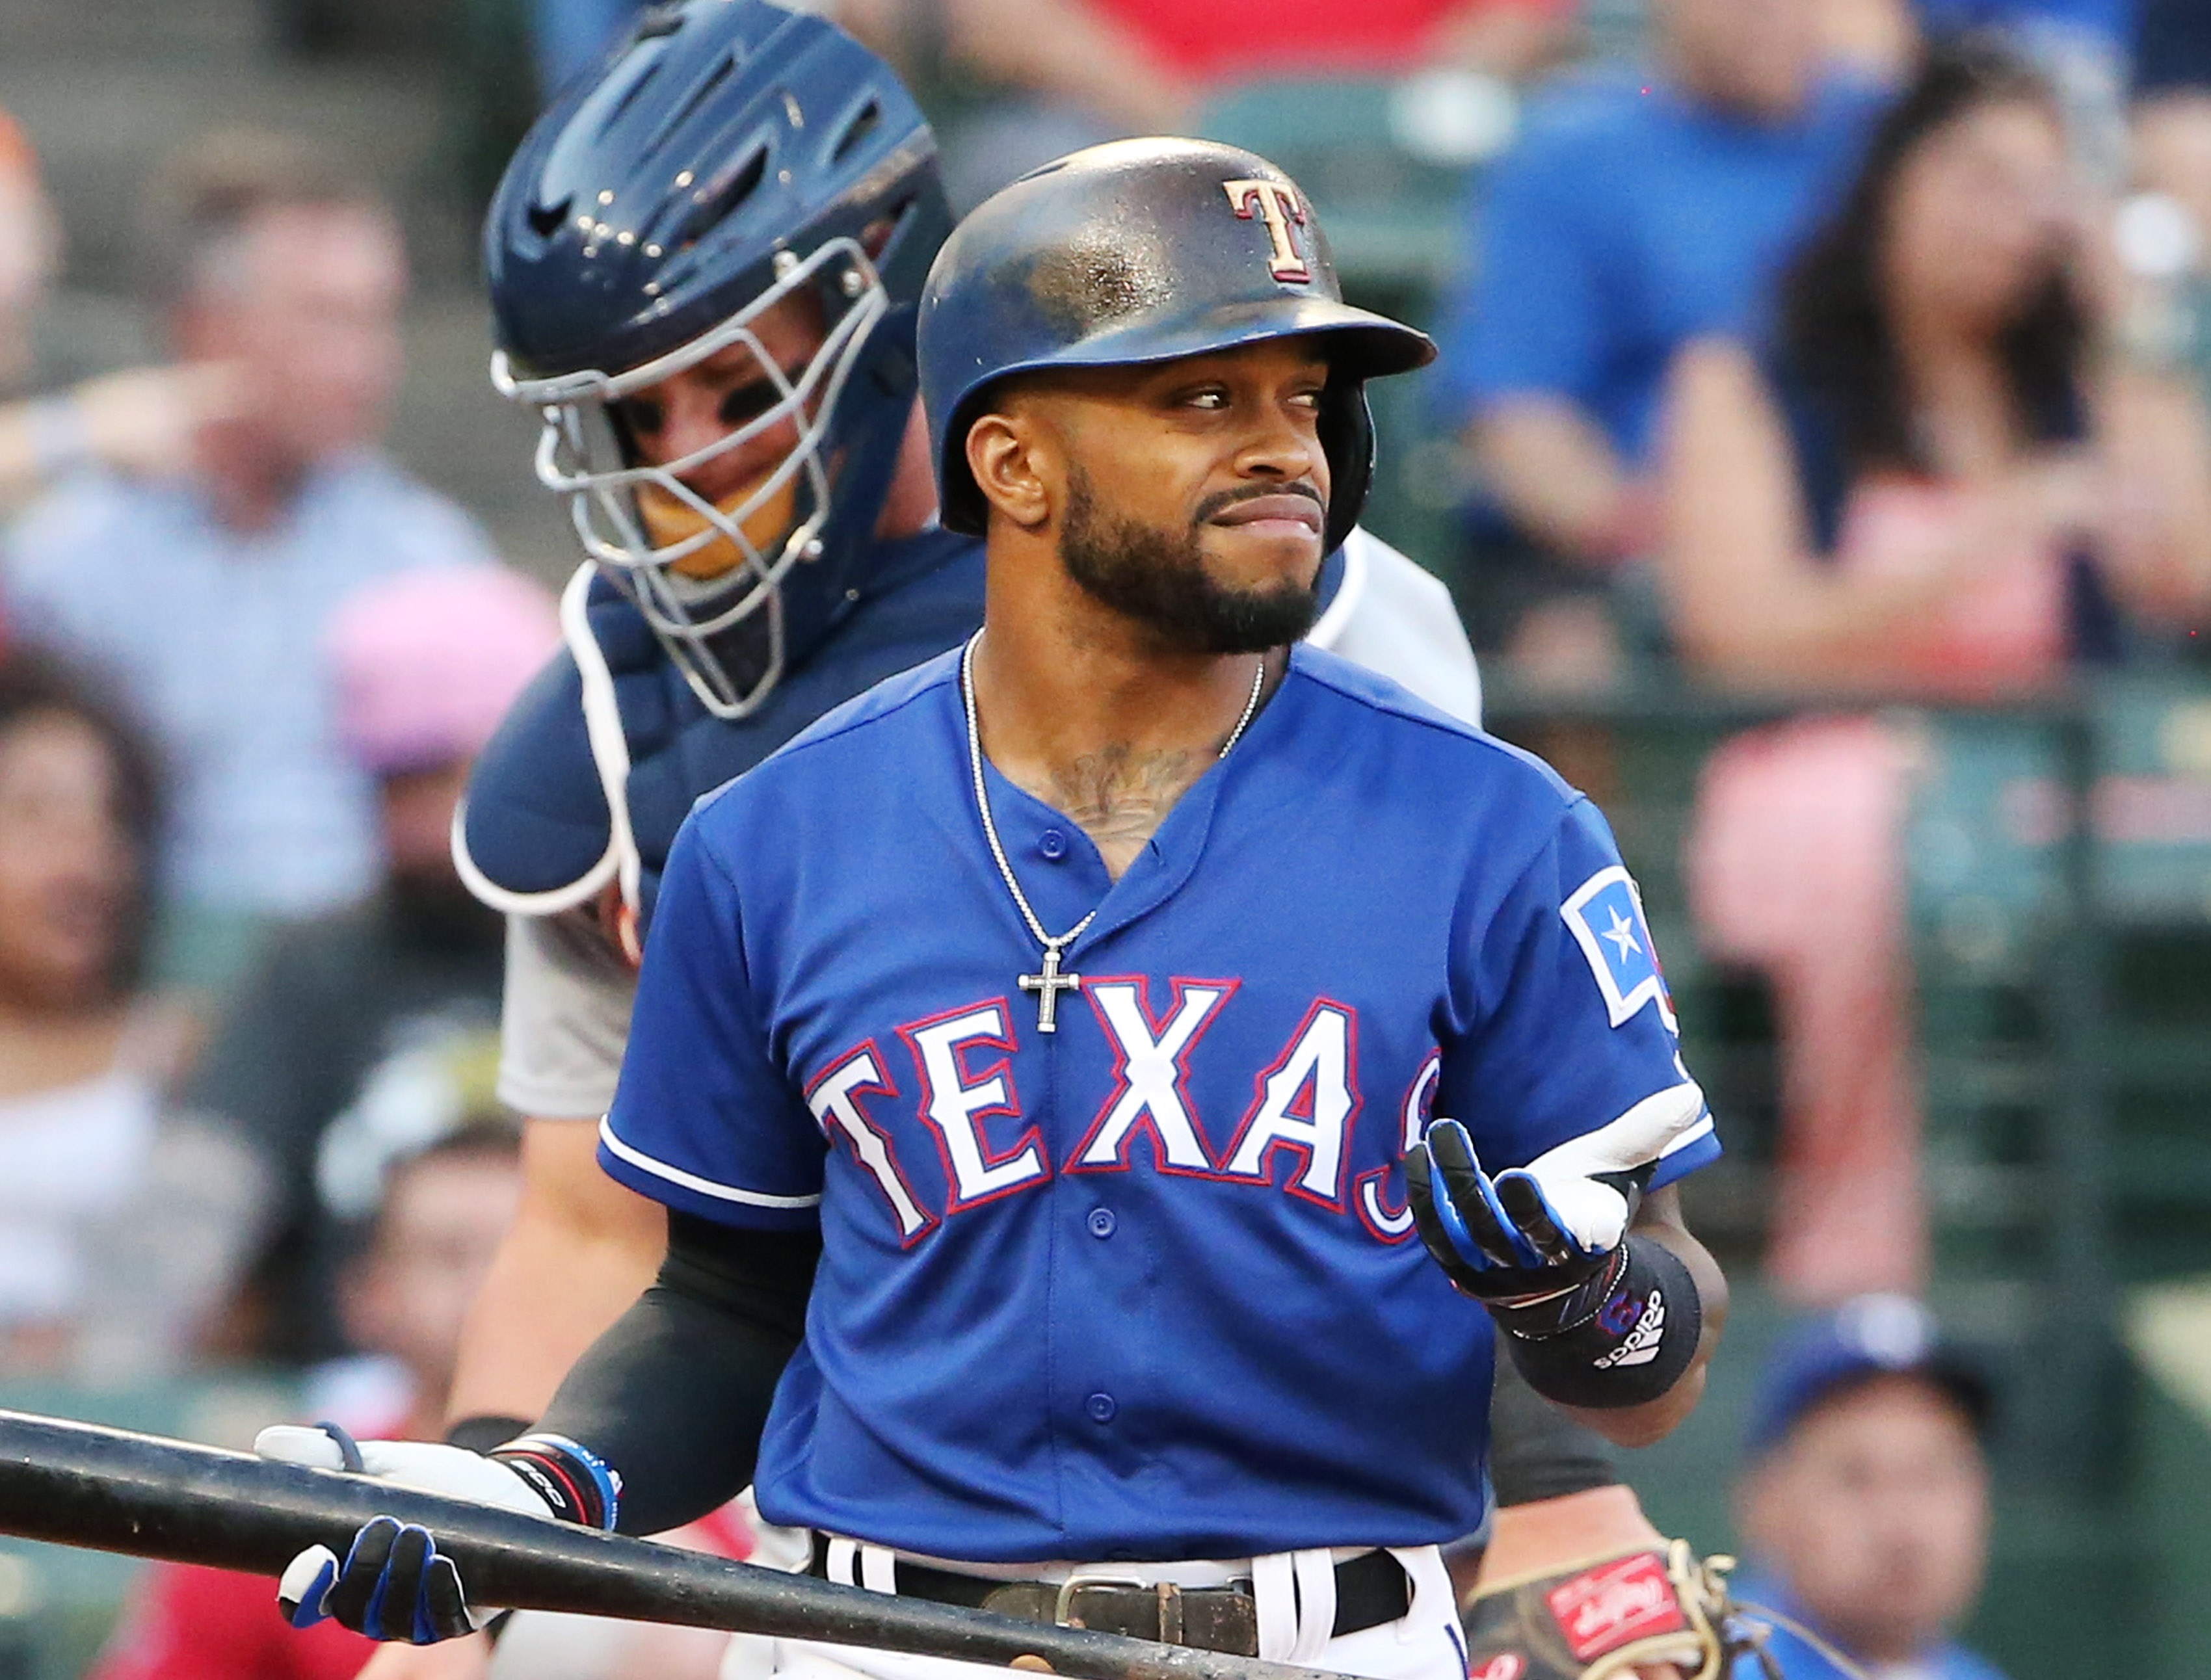 Why the Rangers sent Delino DeShields down during a confusing day in Texas